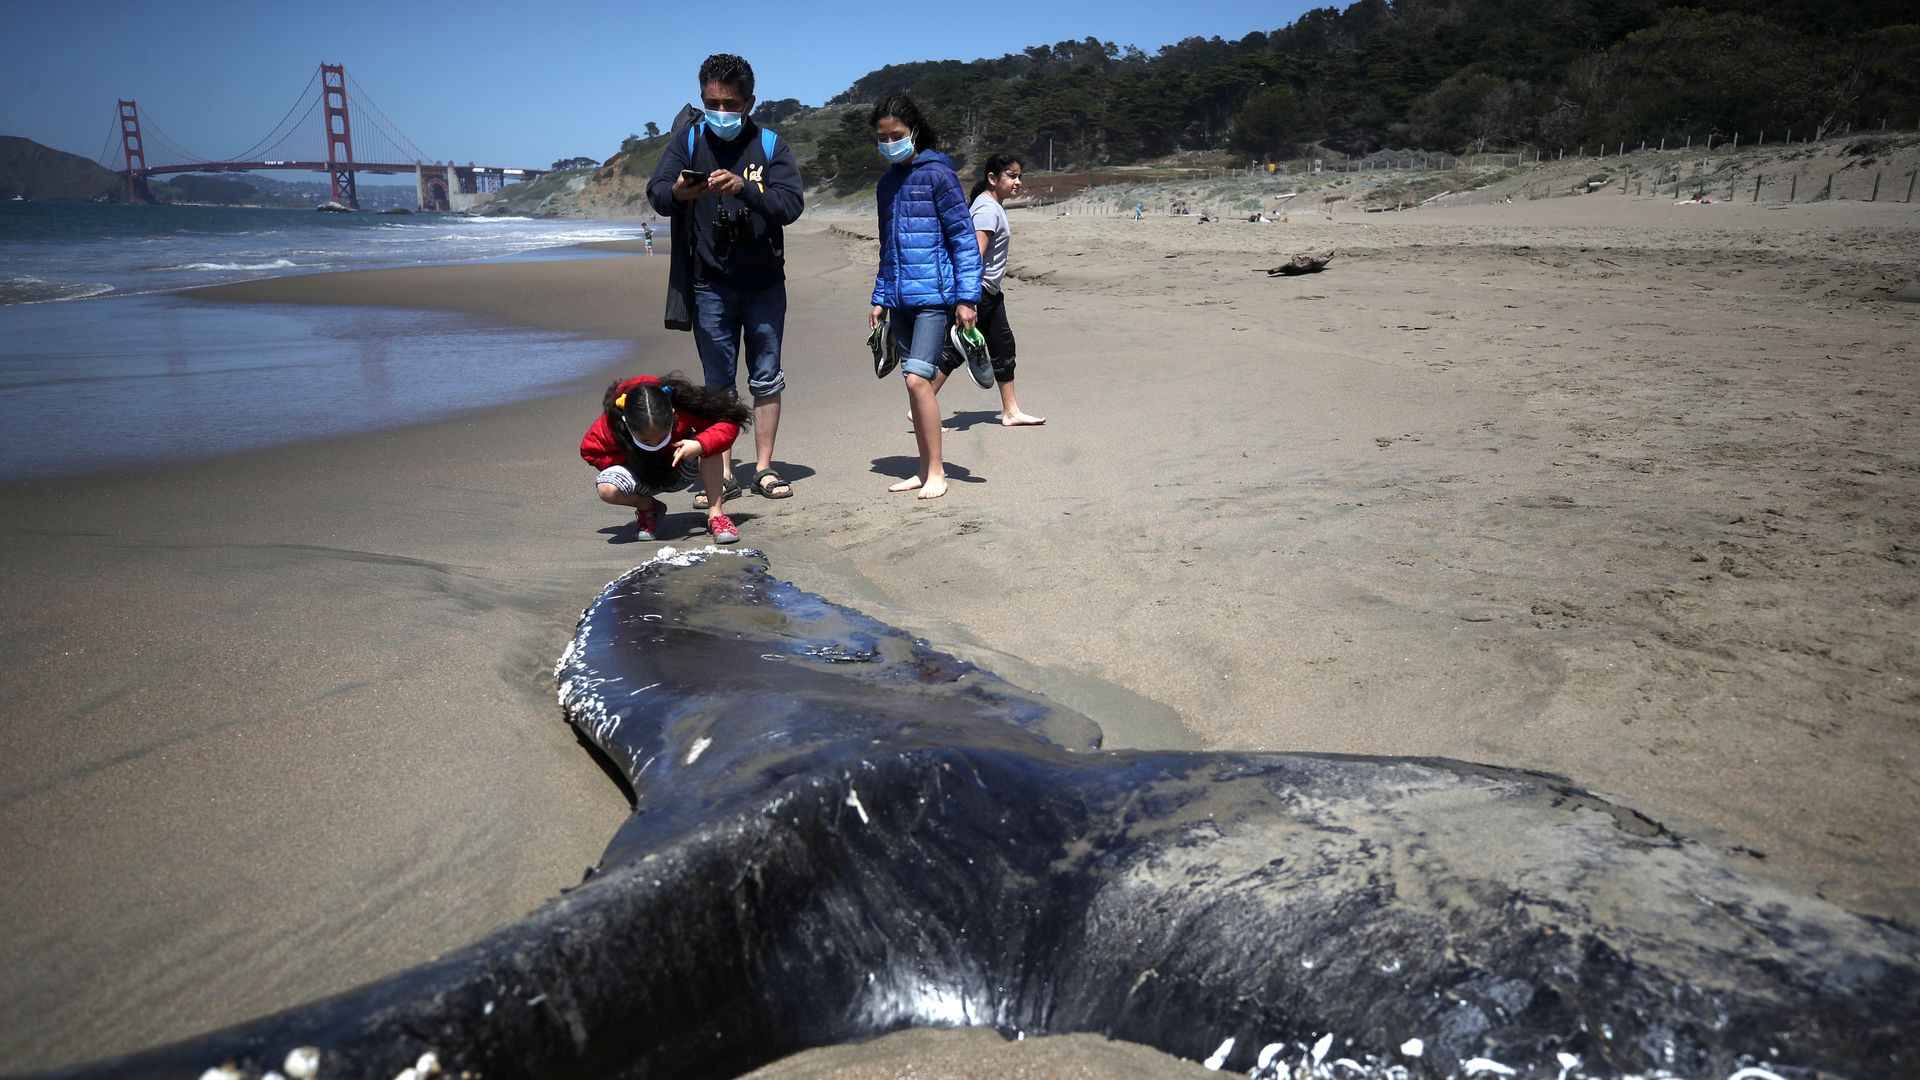 Beachgoers look at a dead juvenile Humpback Whale that washed up on Baker Beach on April 21, 2020 in San Francisco, California.